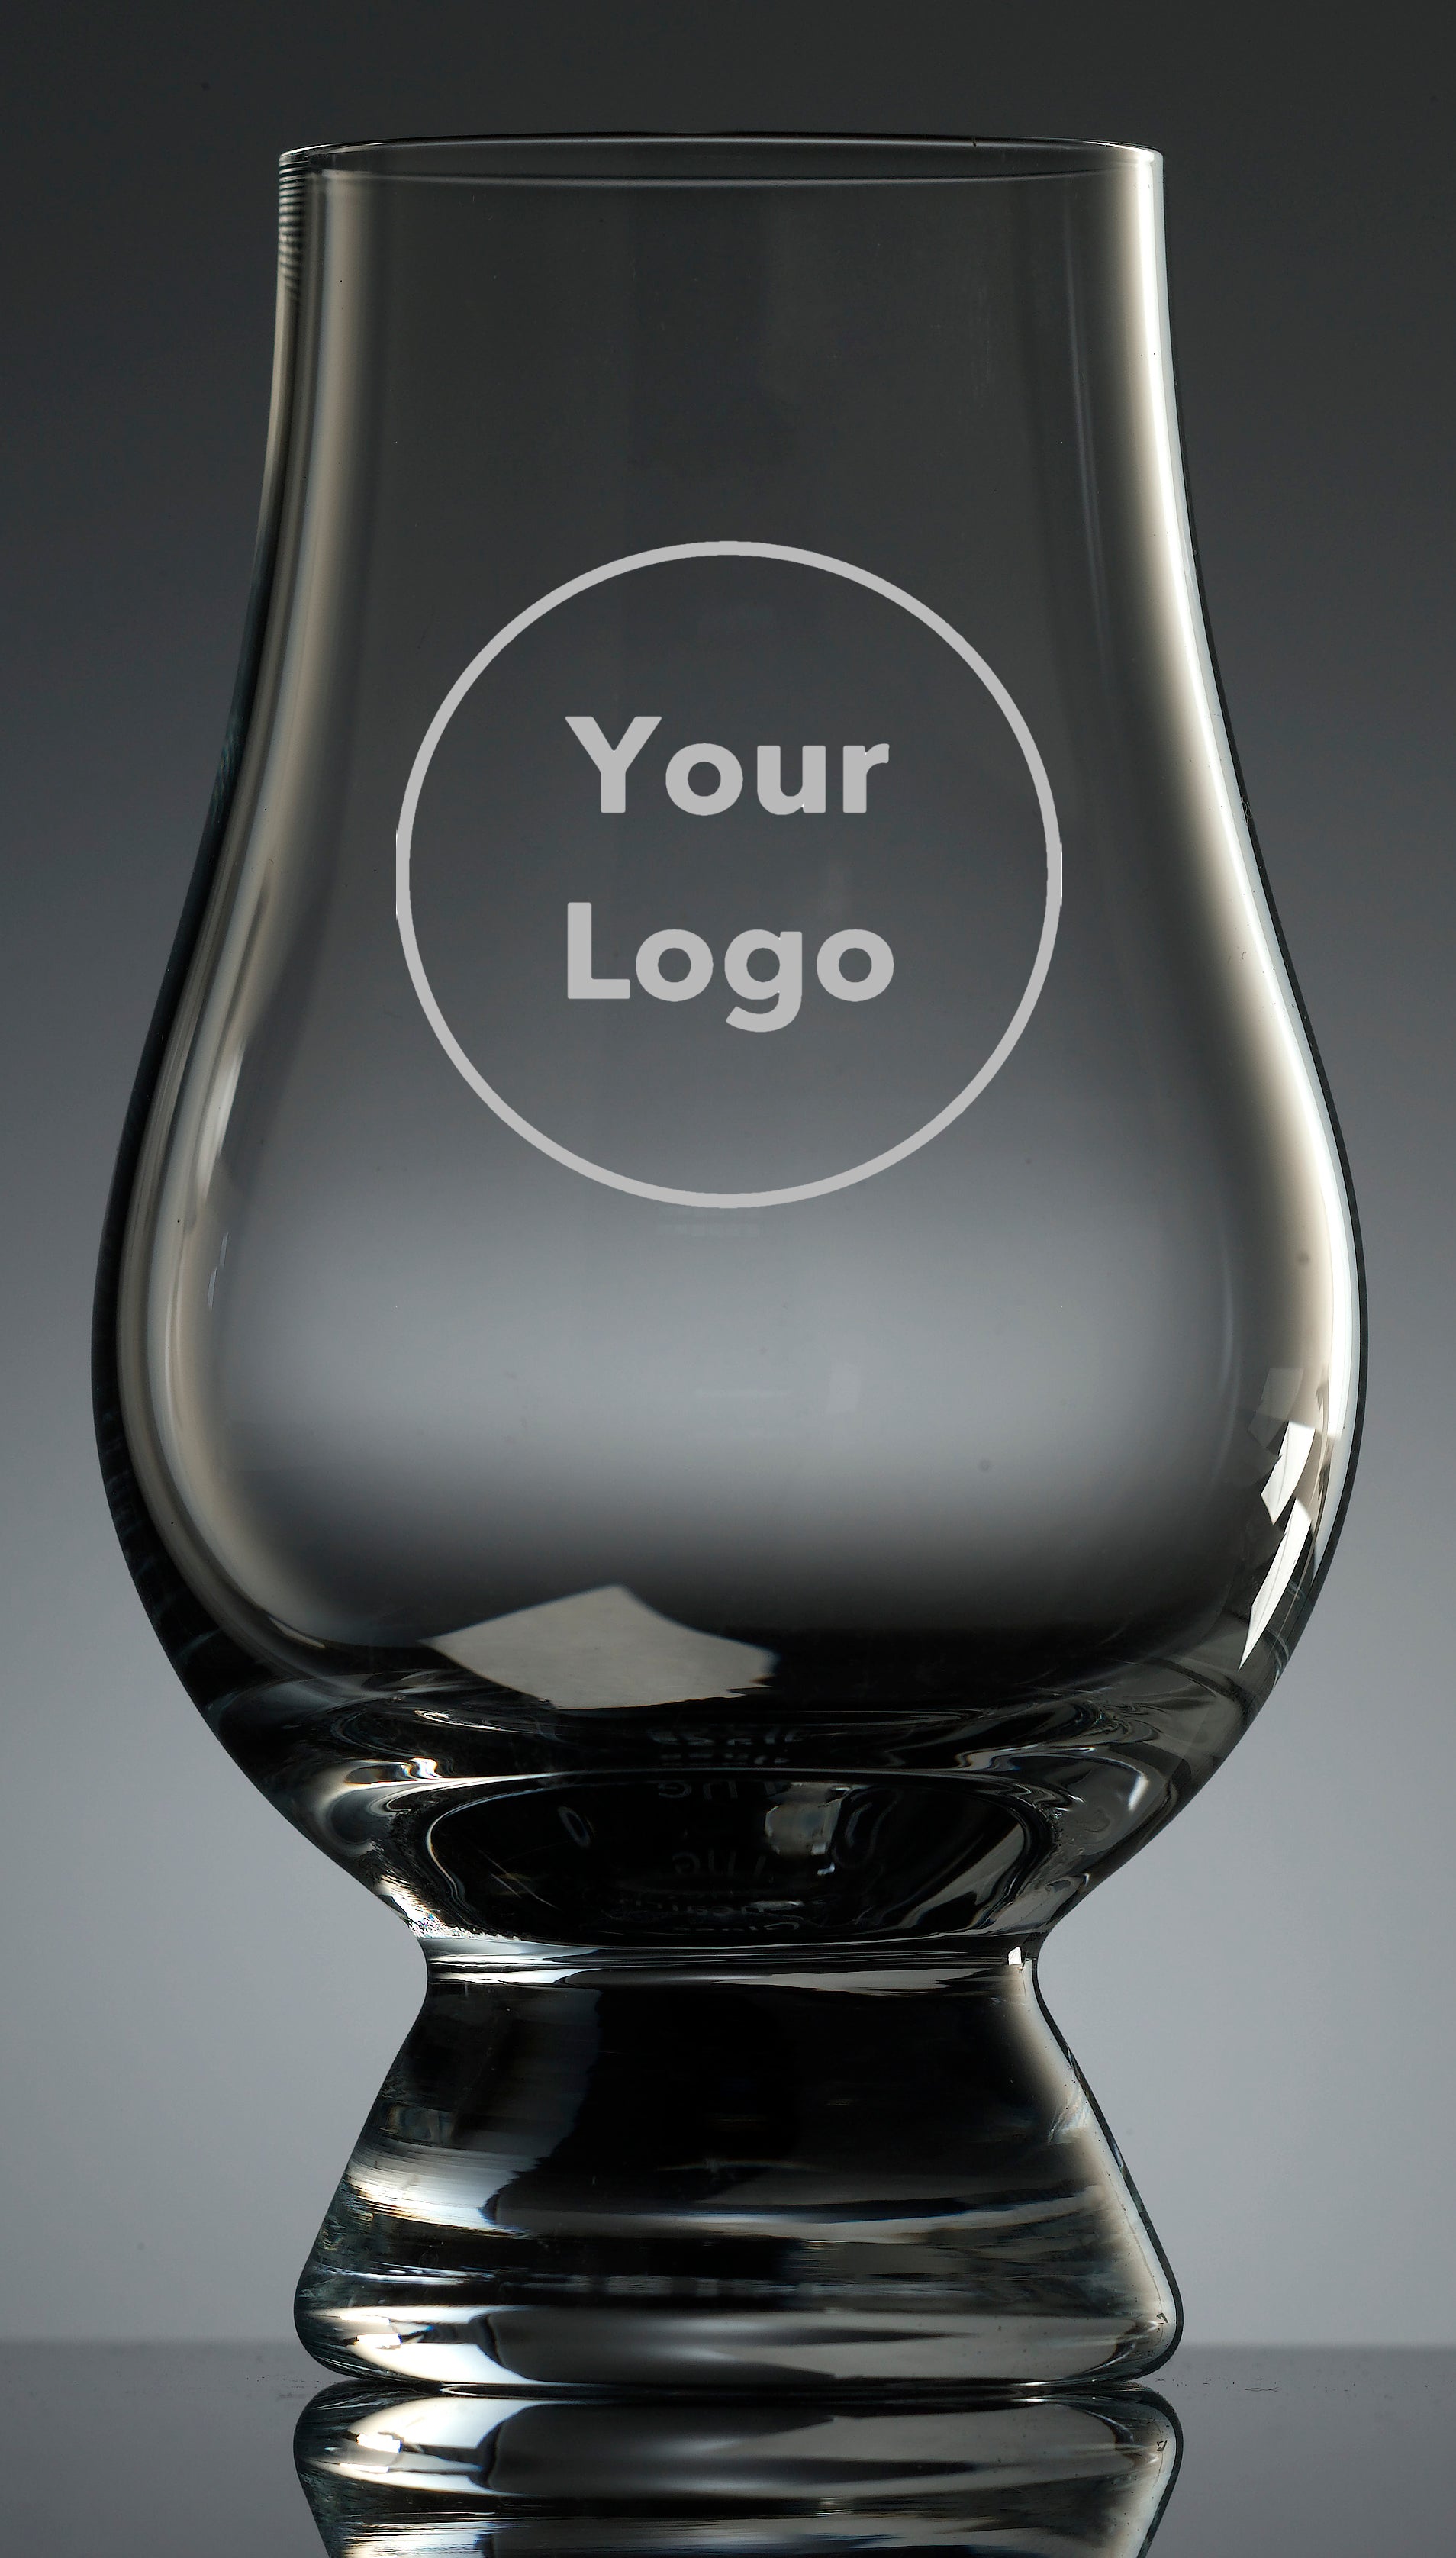 Etching of custom logo is possible on all glassware.  Pricing is based on quantity ordered.